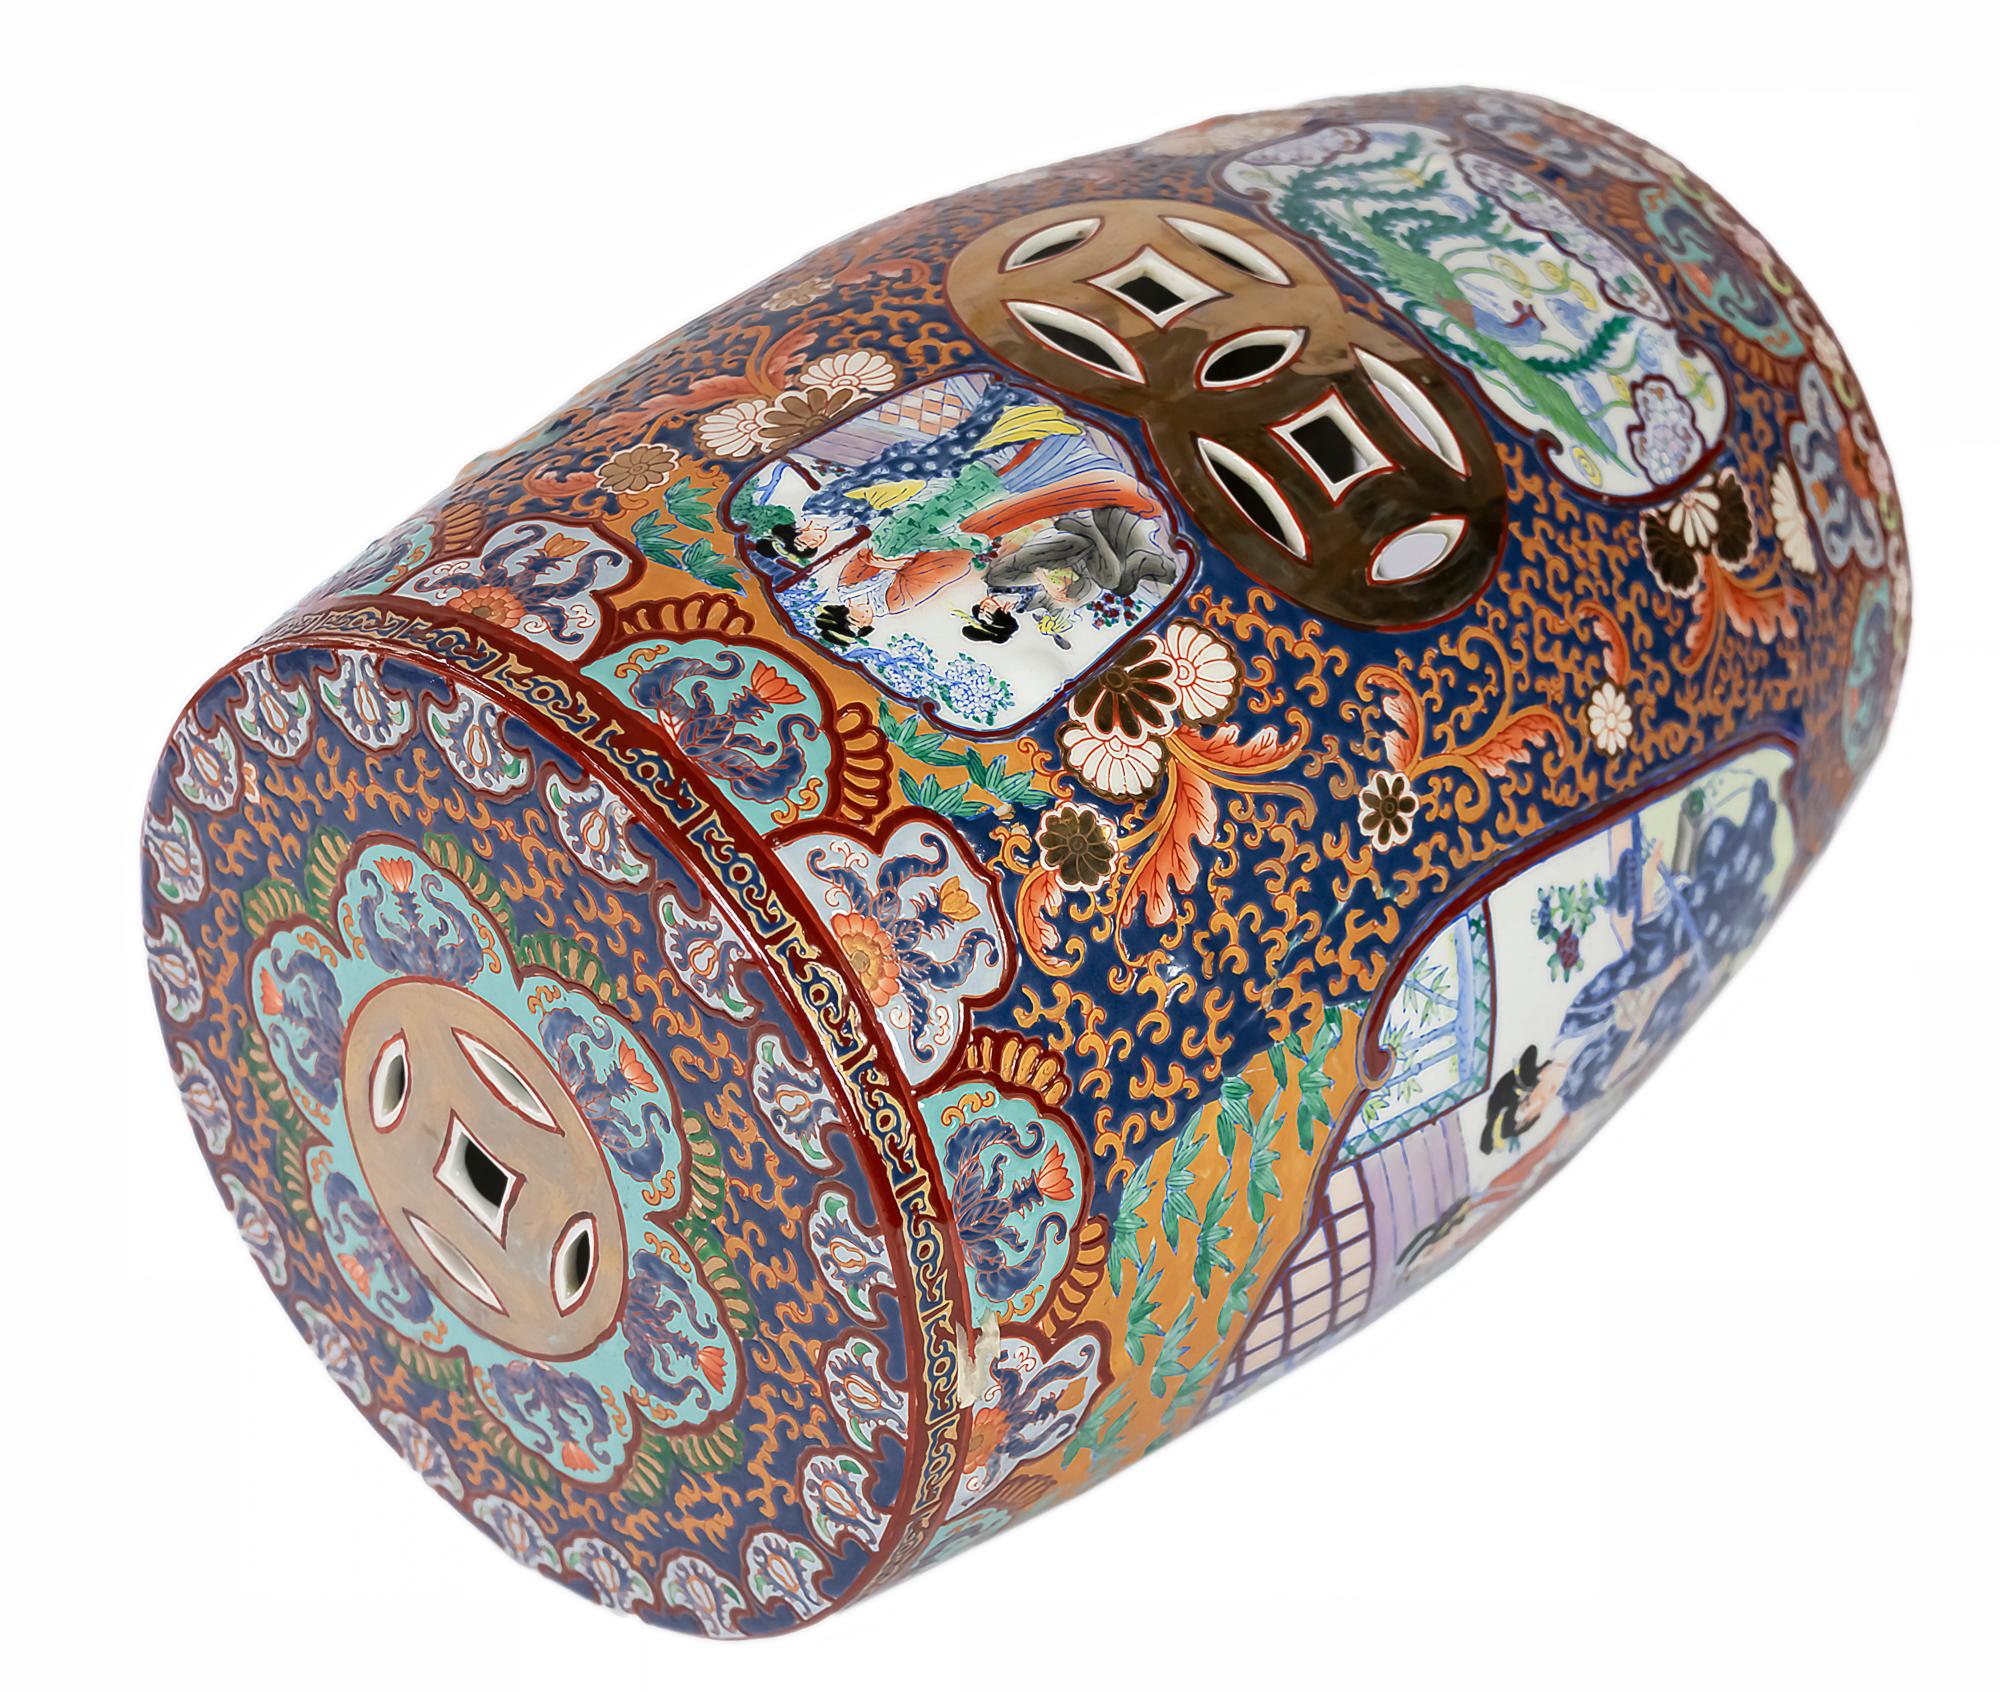 Hand-Painted Ceramic Hand Painted Chinese Garden Stool For Sale